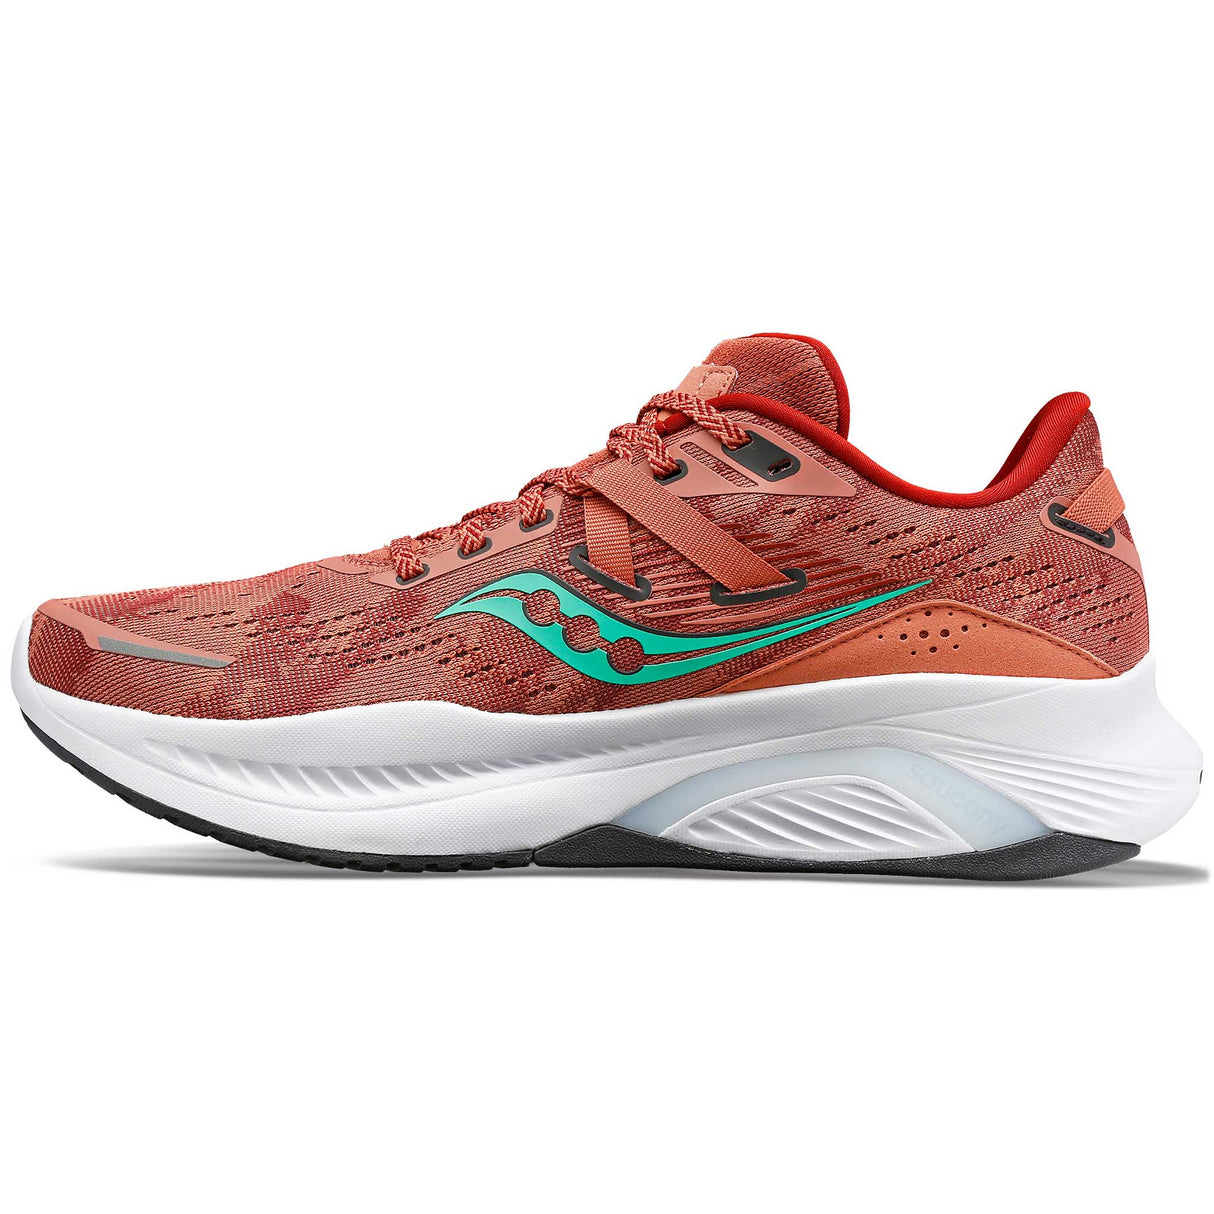 Saucony Guide 16 running de course femme - soot / sprig lateral